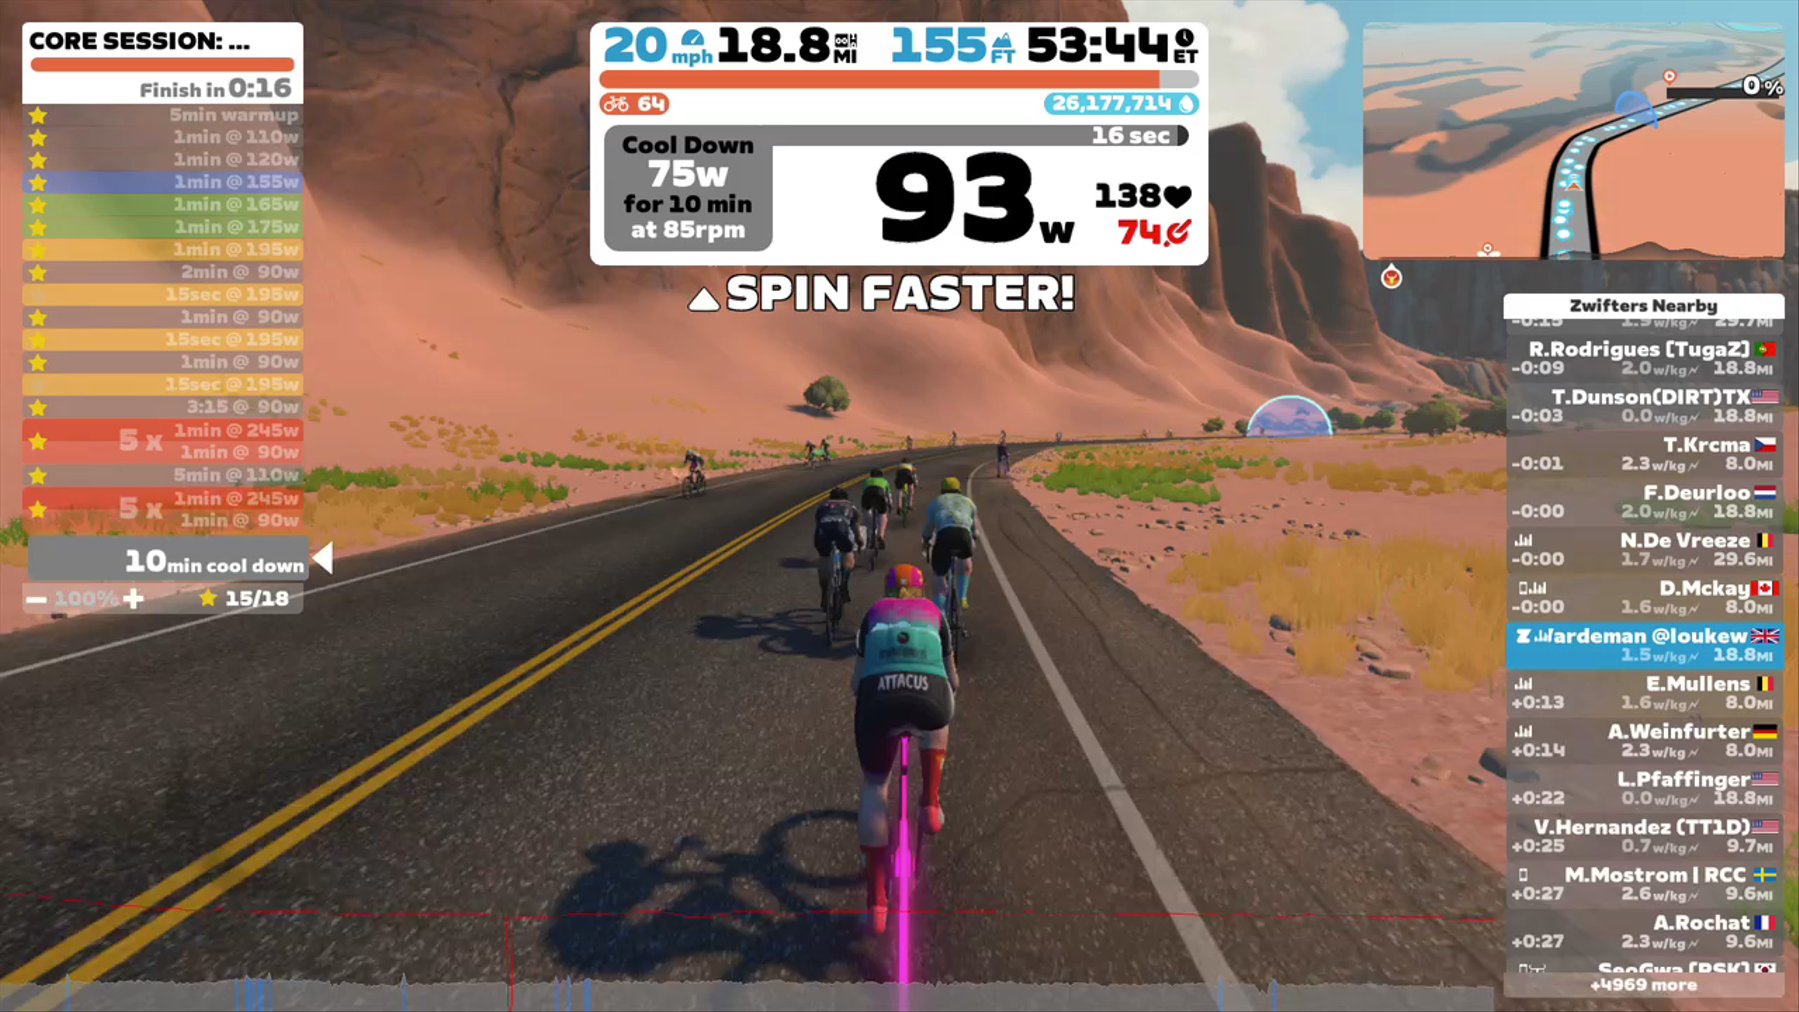 Zwift - CORE SESSION: Minute on / Minute off in Watopia